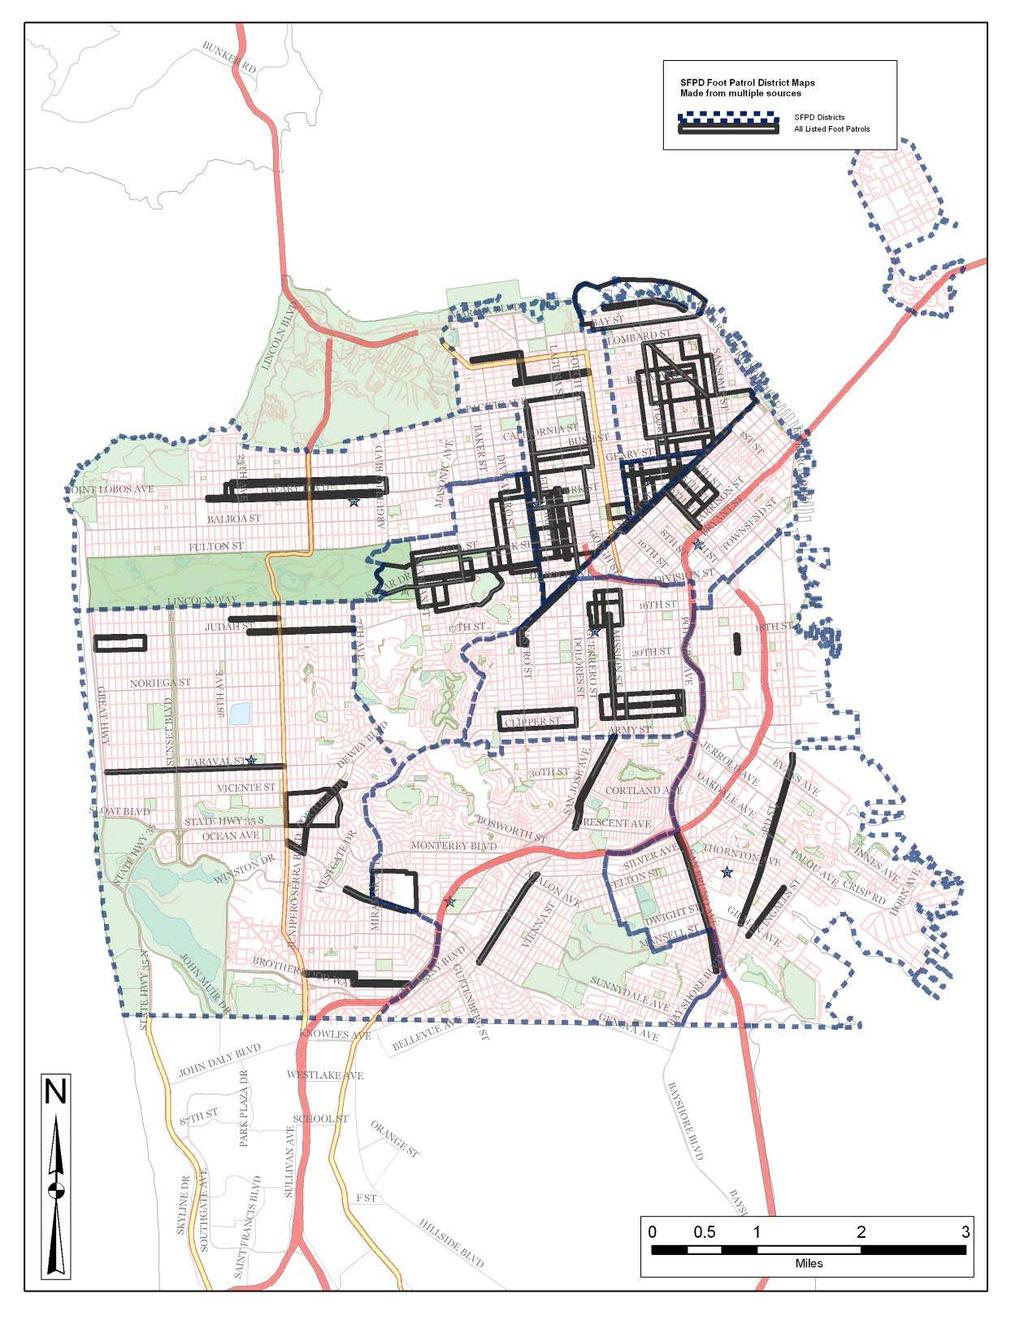 Map 3: Citywide View of all Foot Beats provided by SFPD 2007 44 Source: SFPD Chief s maps, FOB and District Captain Records 44 This